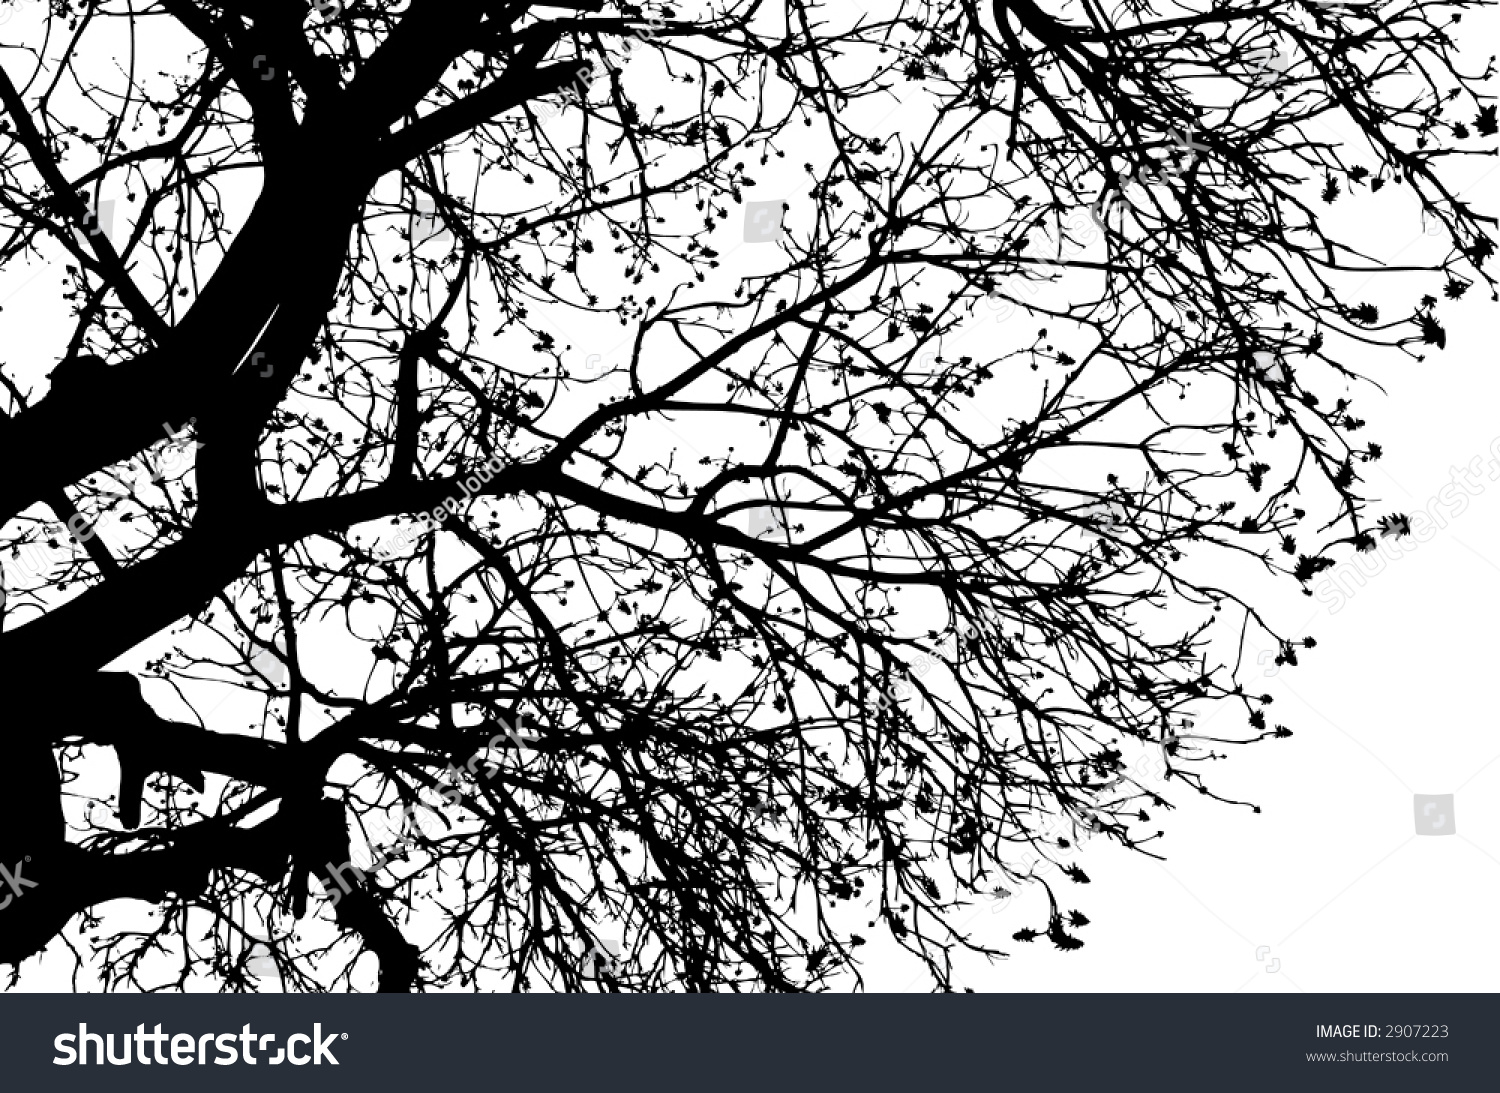 Detailed ,Intricate Tree Branches Stock Vector Illustration 2907223